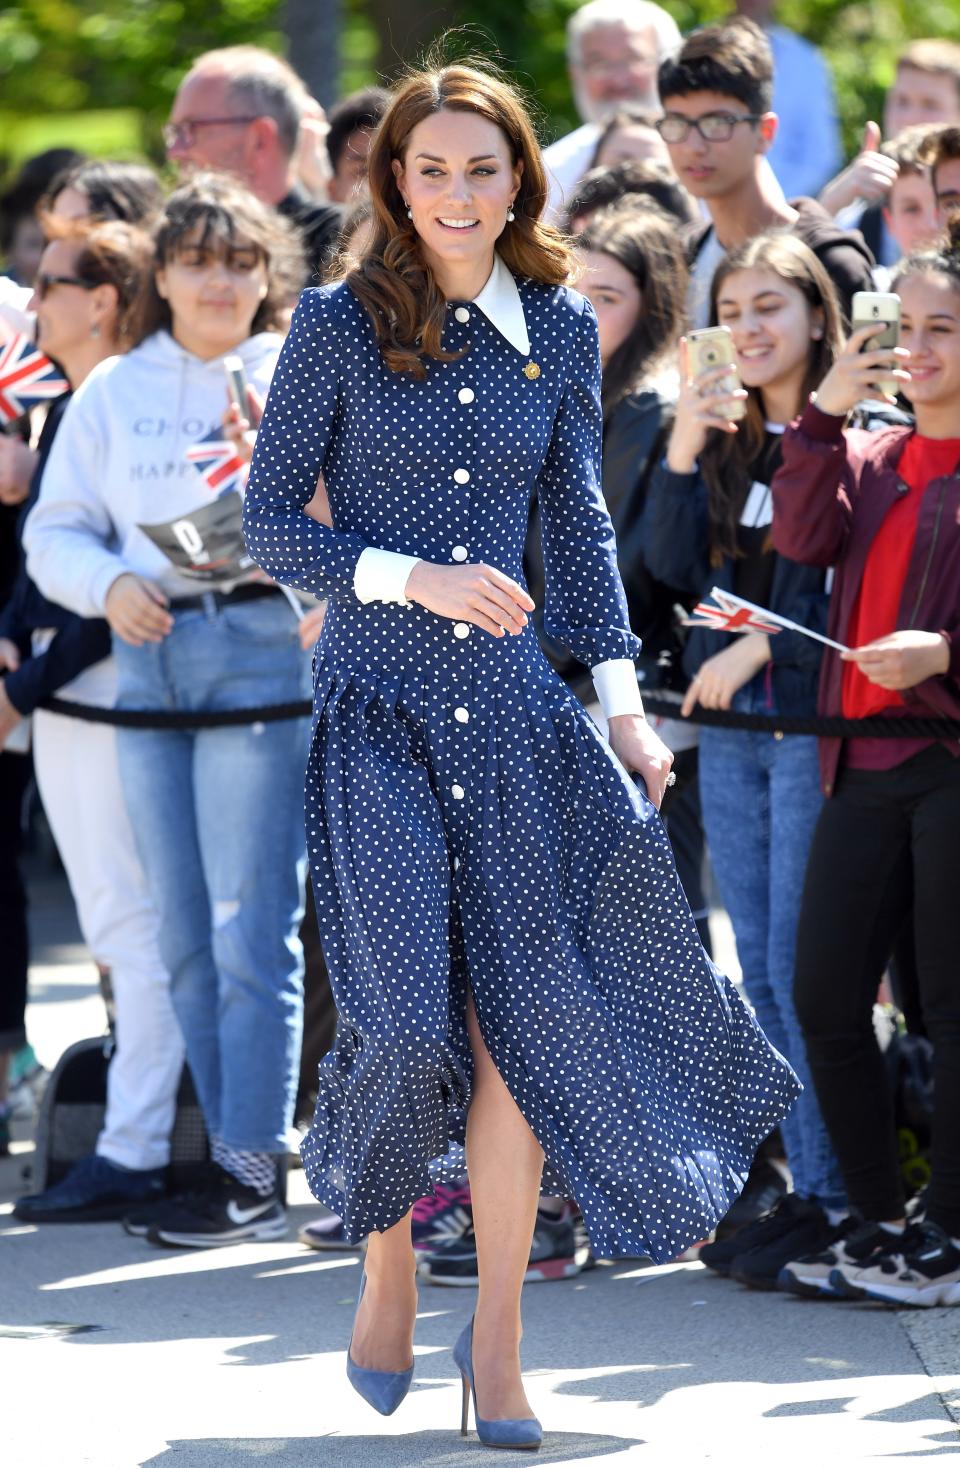 Kate Middleton rewore a dress by Alessandra Rich that's reminiscent of a famous polka-dot Princess Diana look.